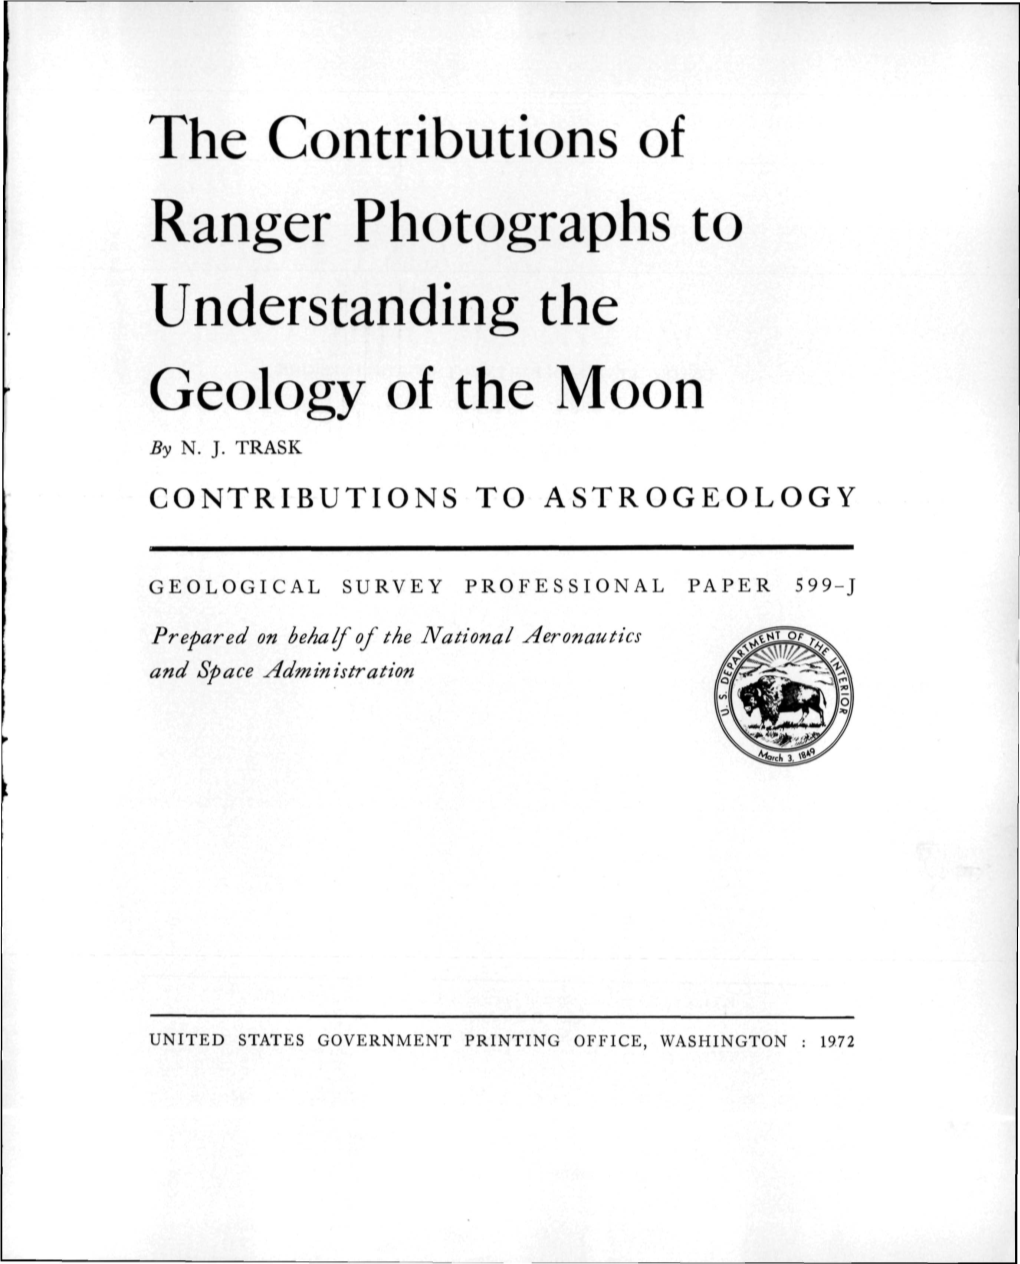 The Contributions of Ranger Photographs to Understanding the Geology of the Moon by N